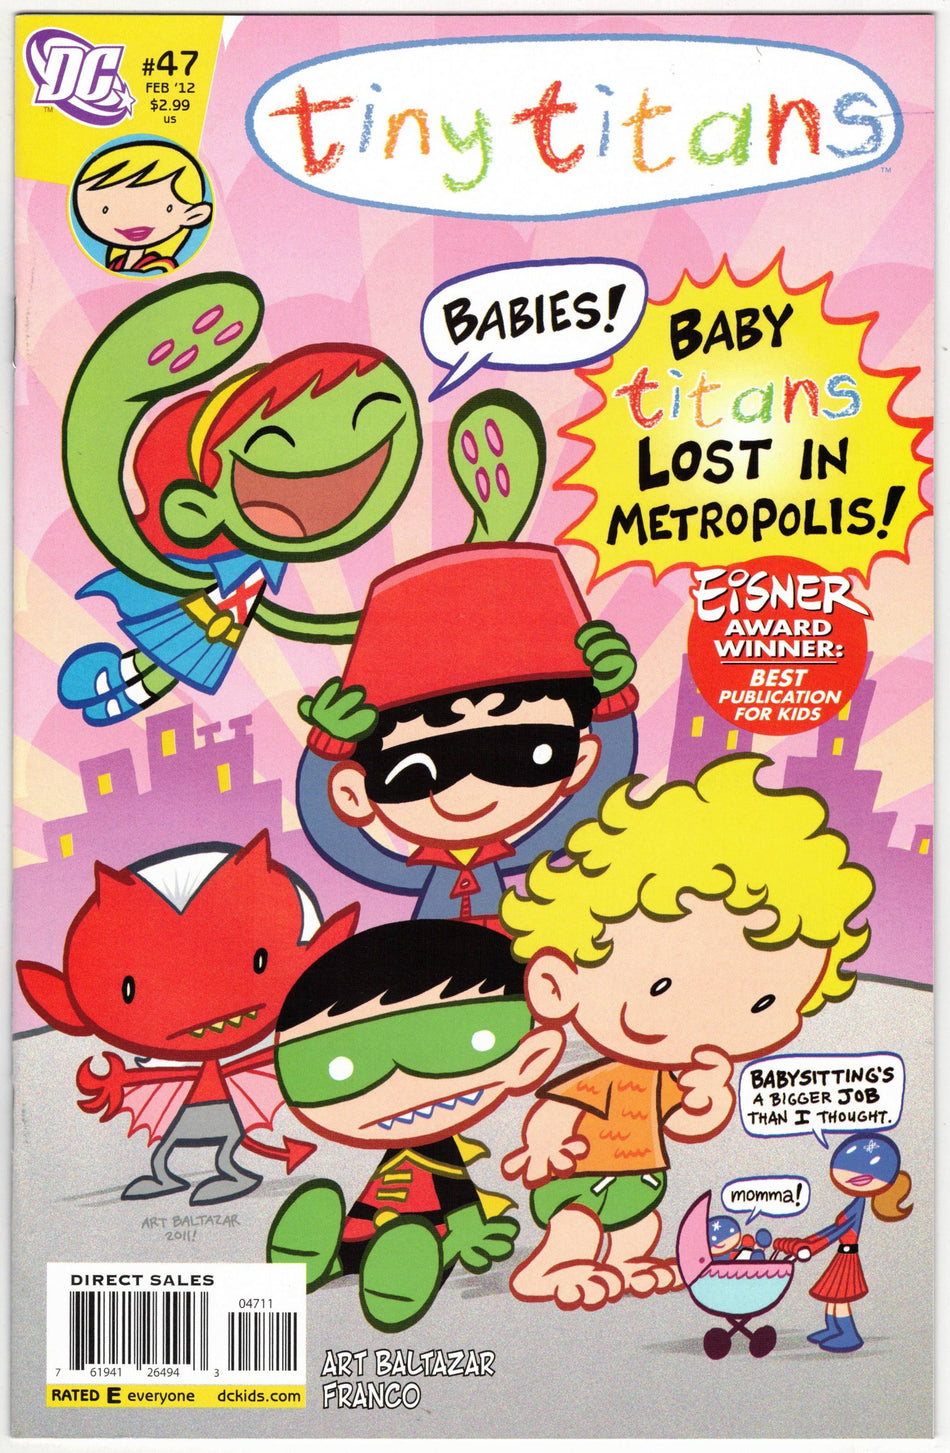 Photo of Tiny Titans (2011) Issue 47 - Comic sold by Stronghold Collectibles